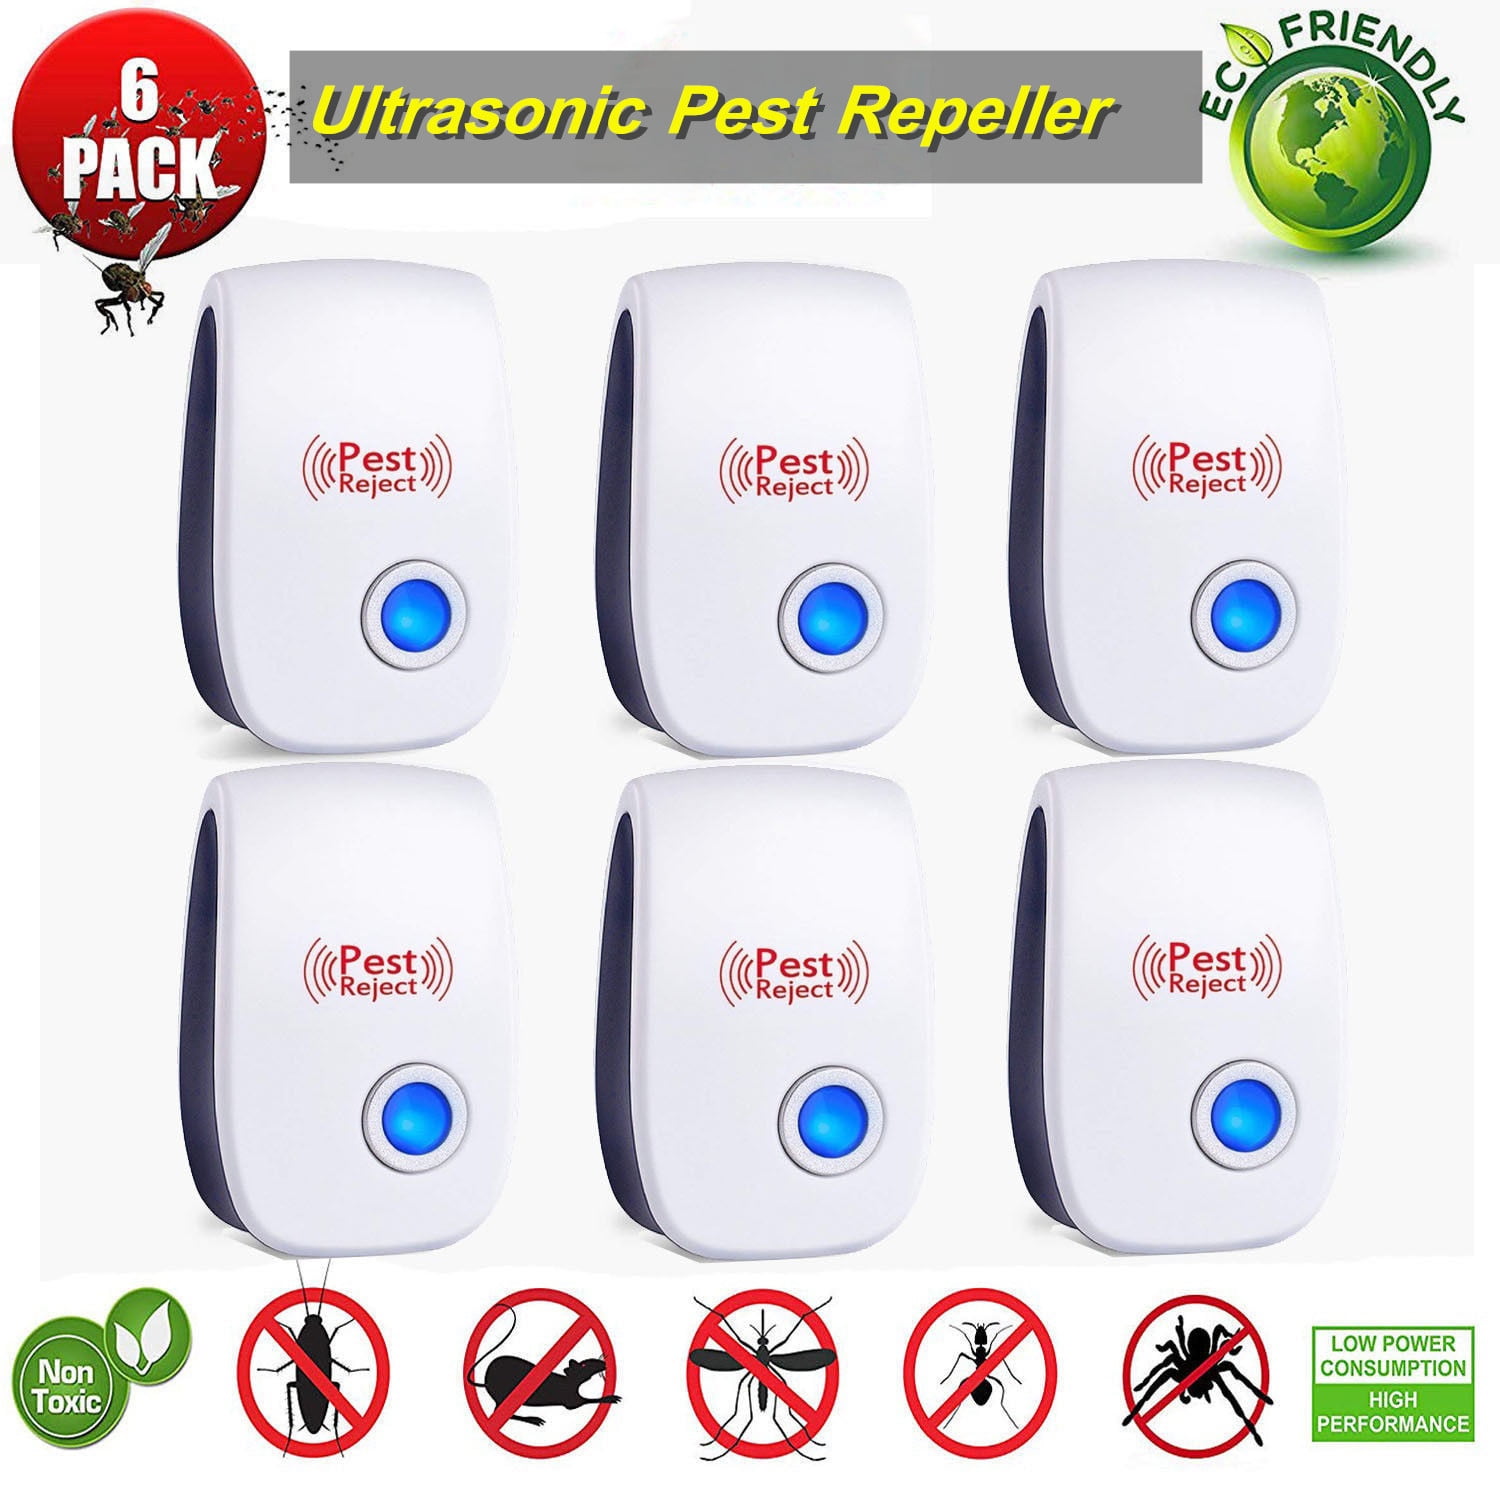 4 Pack Ultrasonic Pest Control Repeller Reject Anti Rat Mice Spider Mosquito New 